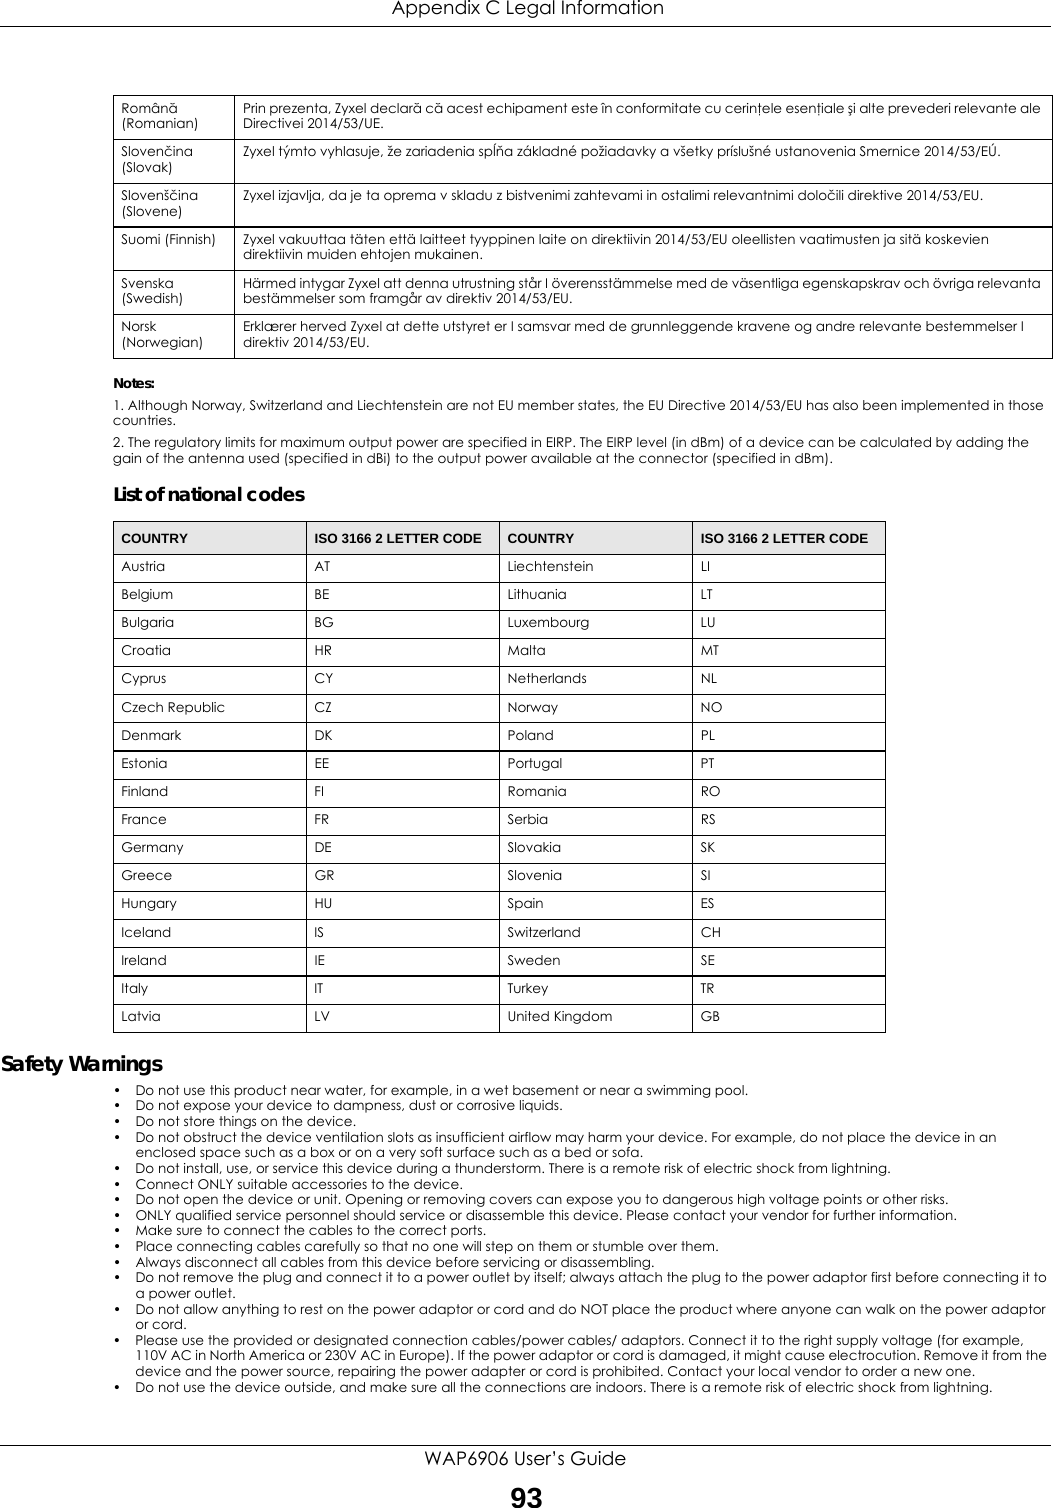  Appendix C Legal InformationWAP6906 User’s Guide93Notes:1. Although Norway, Switzerland and Liechtenstein are not EU member states, the EU Directive 2014/53/EU has also been implemented in those countries.2. The regulatory limits for maximum output power are specified in EIRP. The EIRP level (in dBm) of a device can be calculated by adding the gain of the antenna used (specified in dBi) to the output power available at the connector (specified in dBm).List of national codesSafety Warnings• Do not use this product near water, for example, in a wet basement or near a swimming pool.• Do not expose your device to dampness, dust or corrosive liquids.• Do not store things on the device.• Do not obstruct the device ventilation slots as insufficient airflow may harm your device. For example, do not place the device in an enclosed space such as a box or on a very soft surface such as a bed or sofa.• Do not install, use, or service this device during a thunderstorm. There is a remote risk of electric shock from lightning.• Connect ONLY suitable accessories to the device.• Do not open the device or unit. Opening or removing covers can expose you to dangerous high voltage points or other risks. • ONLY qualified service personnel should service or disassemble this device. Please contact your vendor for further information.• Make sure to connect the cables to the correct ports.• Place connecting cables carefully so that no one will step on them or stumble over them.• Always disconnect all cables from this device before servicing or disassembling.• Do not remove the plug and connect it to a power outlet by itself; always attach the plug to the power adaptor first before connecting it to a power outlet.• Do not allow anything to rest on the power adaptor or cord and do NOT place the product where anyone can walk on the power adaptor or cord.• Please use the provided or designated connection cables/power cables/ adaptors. Connect it to the right supply voltage (for example, 110V AC in North America or 230V AC in Europe). If the power adaptor or cord is damaged, it might cause electrocution. Remove it from the device and the power source, repairing the power adapter or cord is prohibited. Contact your local vendor to order a new one.• Do not use the device outside, and make sure all the connections are indoors. There is a remote risk of electric shock from lightning.Română (Romanian)Prin prezenta, Zyxel declară că acest echipament este în conformitate cu cerinţele esenţiale şi alte prevederi relevante ale Directivei 2014/53/UE.Slovenčina (Slovak)Zyxel týmto vyhlasuje, že zariadenia spĺňa základné požiadavky a všetky príslušné ustanovenia Smernice 2014/53/EÚ.Slovenščina (Slovene)Zyxel izjavlja, da je ta oprema v skladu z bistvenimi zahtevami in ostalimi relevantnimi določili direktive 2014/53/EU.Suomi (Finnish) Zyxel vakuuttaa täten että laitteet tyyppinen laite on direktiivin 2014/53/EU oleellisten vaatimusten ja sitä koskevien direktiivin muiden ehtojen mukainen.Svenska (Swedish)Härmed intygar Zyxel att denna utrustning står I överensstämmelse med de väsentliga egenskapskrav och övriga relevanta bestämmelser som framgår av direktiv 2014/53/EU.Norsk (Norwegian)Erklærer herved Zyxel at dette utstyret er I samsvar med de grunnleggende kravene og andre relevante bestemmelser I direktiv 2014/53/EU.COUNTRY ISO 3166 2 LETTER CODE COUNTRY ISO 3166 2 LETTER CODEAustria AT Liechtenstein LIBelgium BE Lithuania LTBulgaria BG Luxembourg LUCroatia HR Malta MTCyprus CY Netherlands NLCzech Republic CZ Norway NODenmark DK Poland PLEstonia EE Portugal PTFinland FI Romania ROFrance FR Serbia RSGermany DE Slovakia SKGreece GR Slovenia SIHungary HU Spain ESIceland IS Switzerland CHIreland IE Sweden SEItaly IT Turkey TRLatvia LV United Kingdom GB